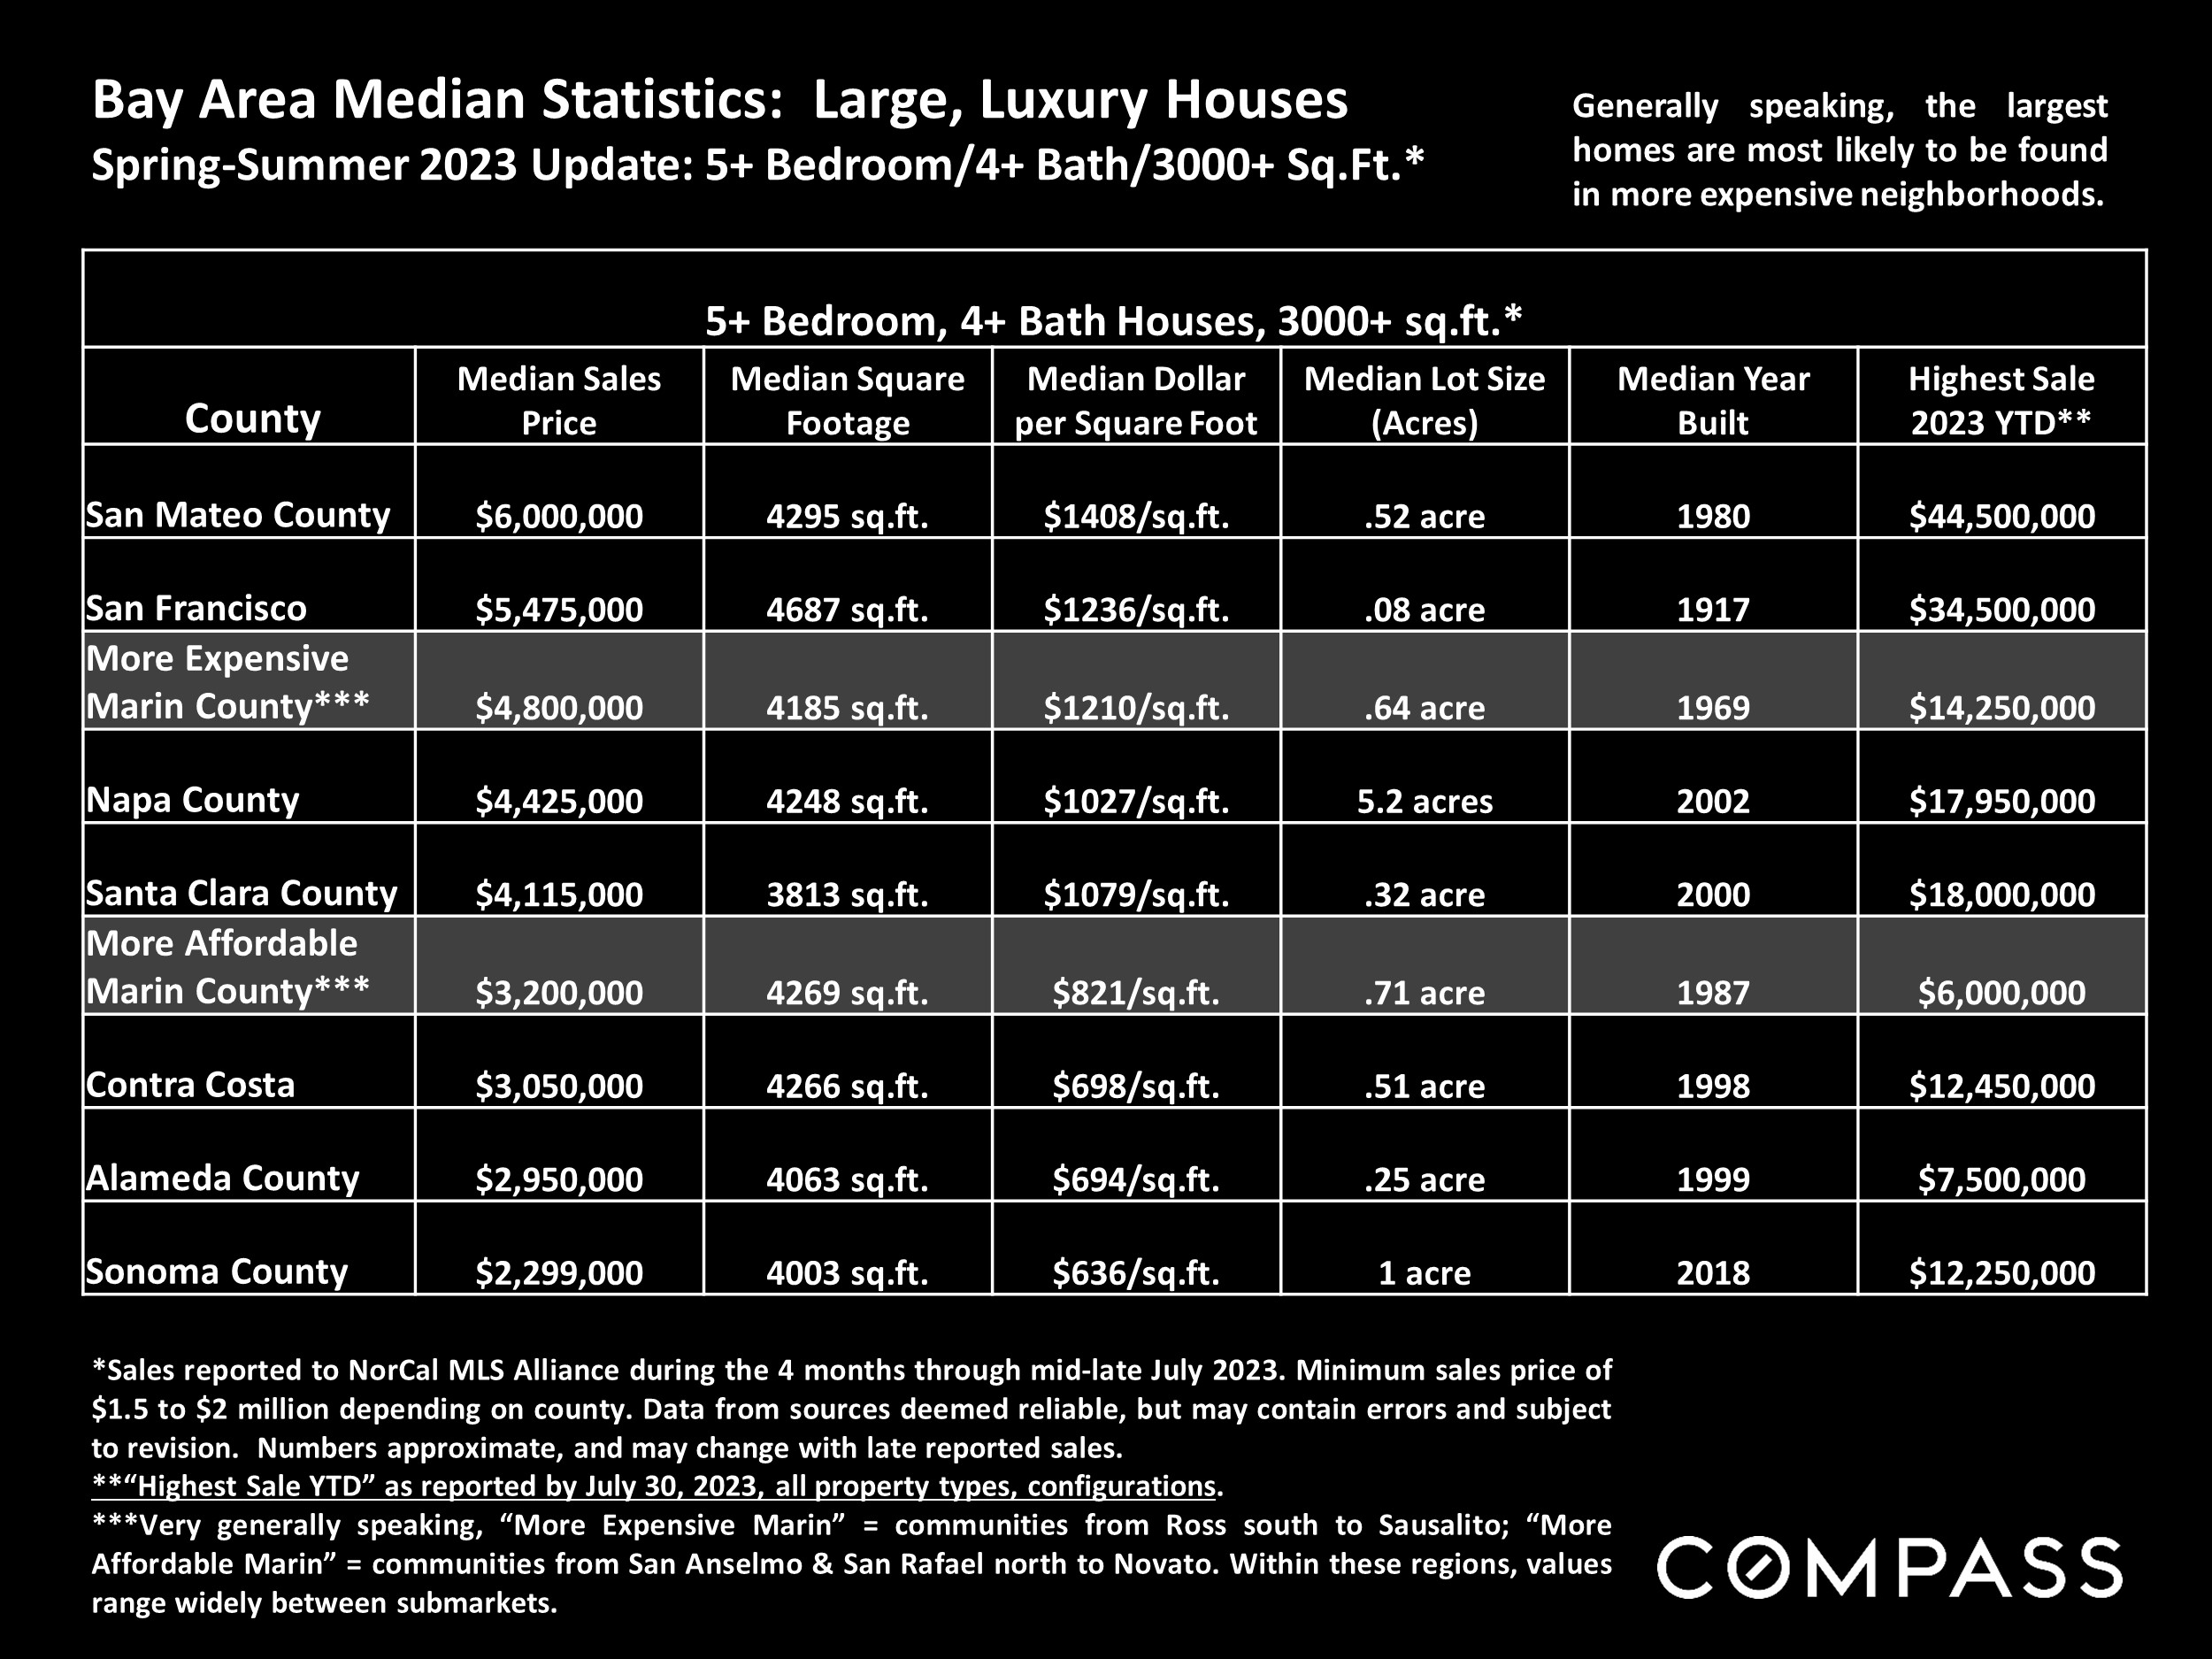 Bay Area Median Statistics: Large, Luxury Houses Generally speaking, the largest Spring-Summer 2023 Update